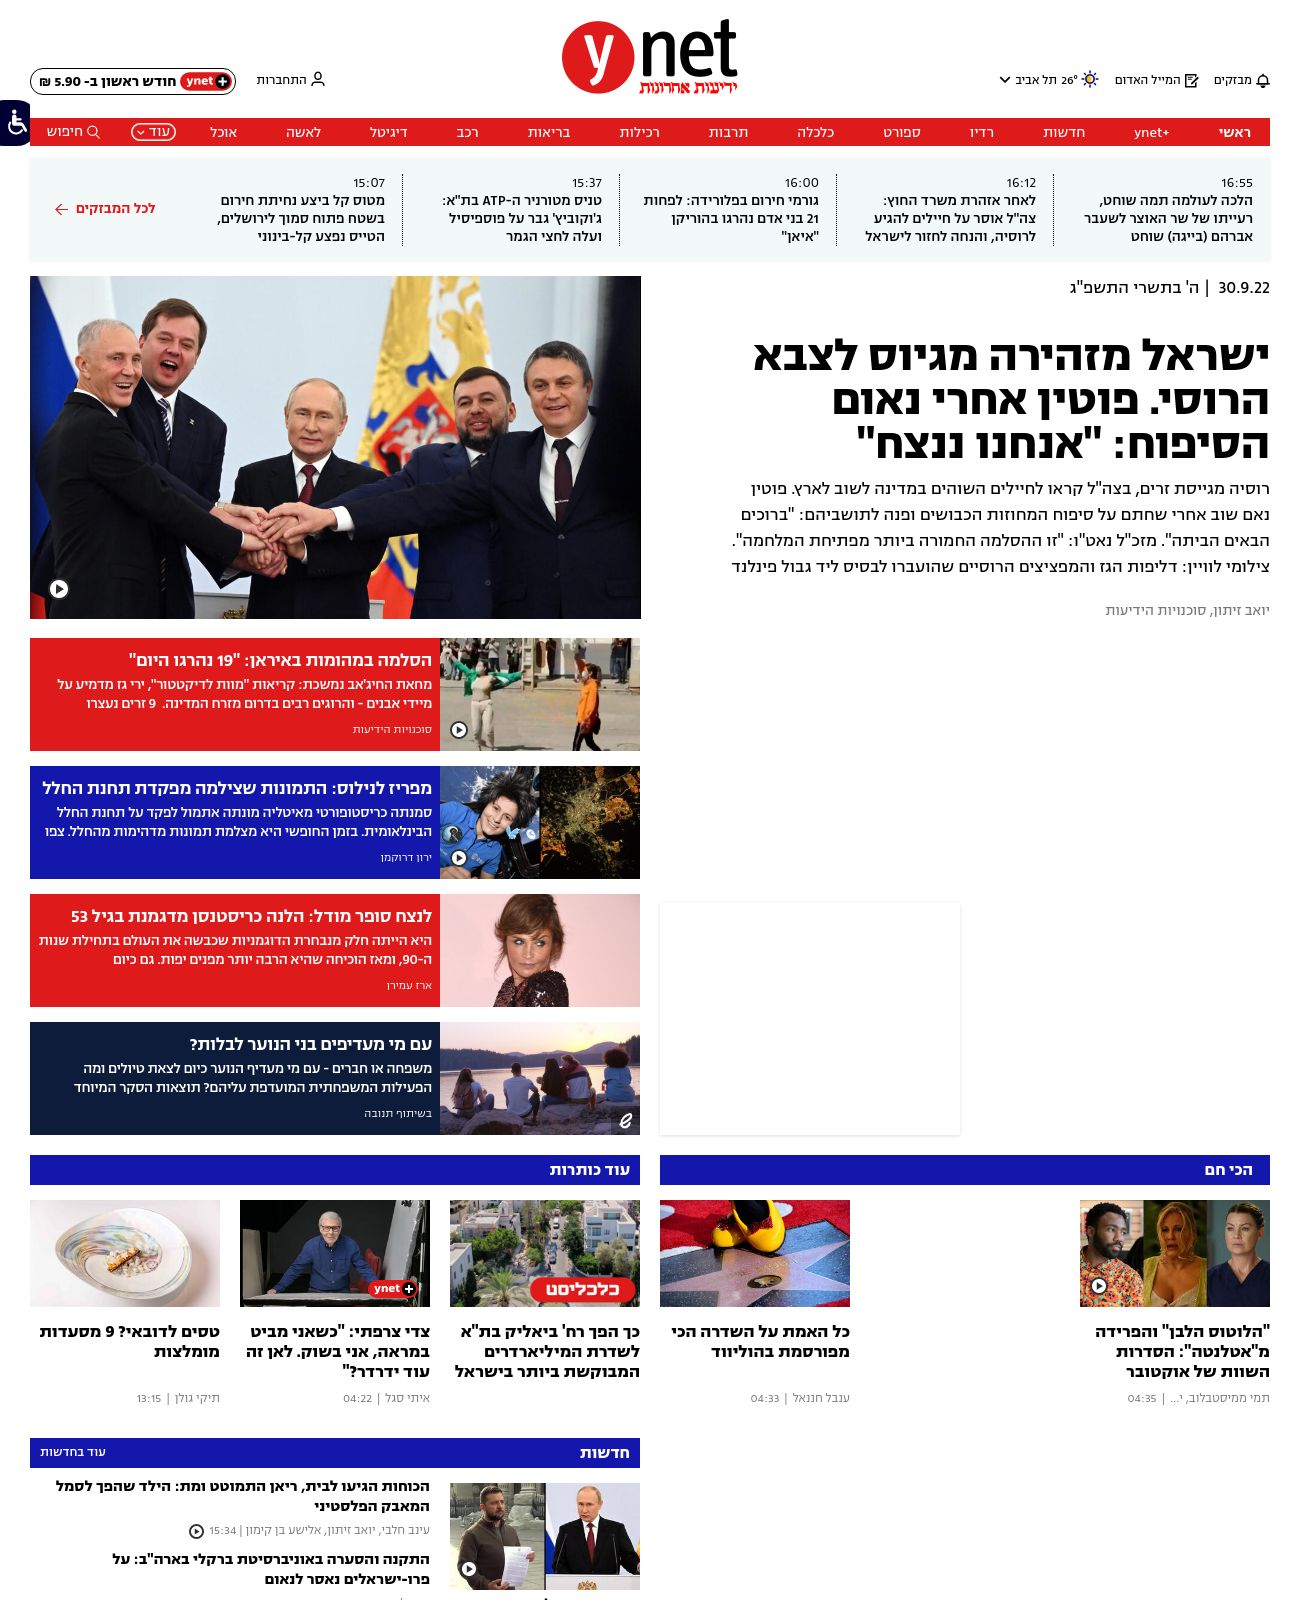 Ynet at 2022-09-30 22:56:25+03:00 local time